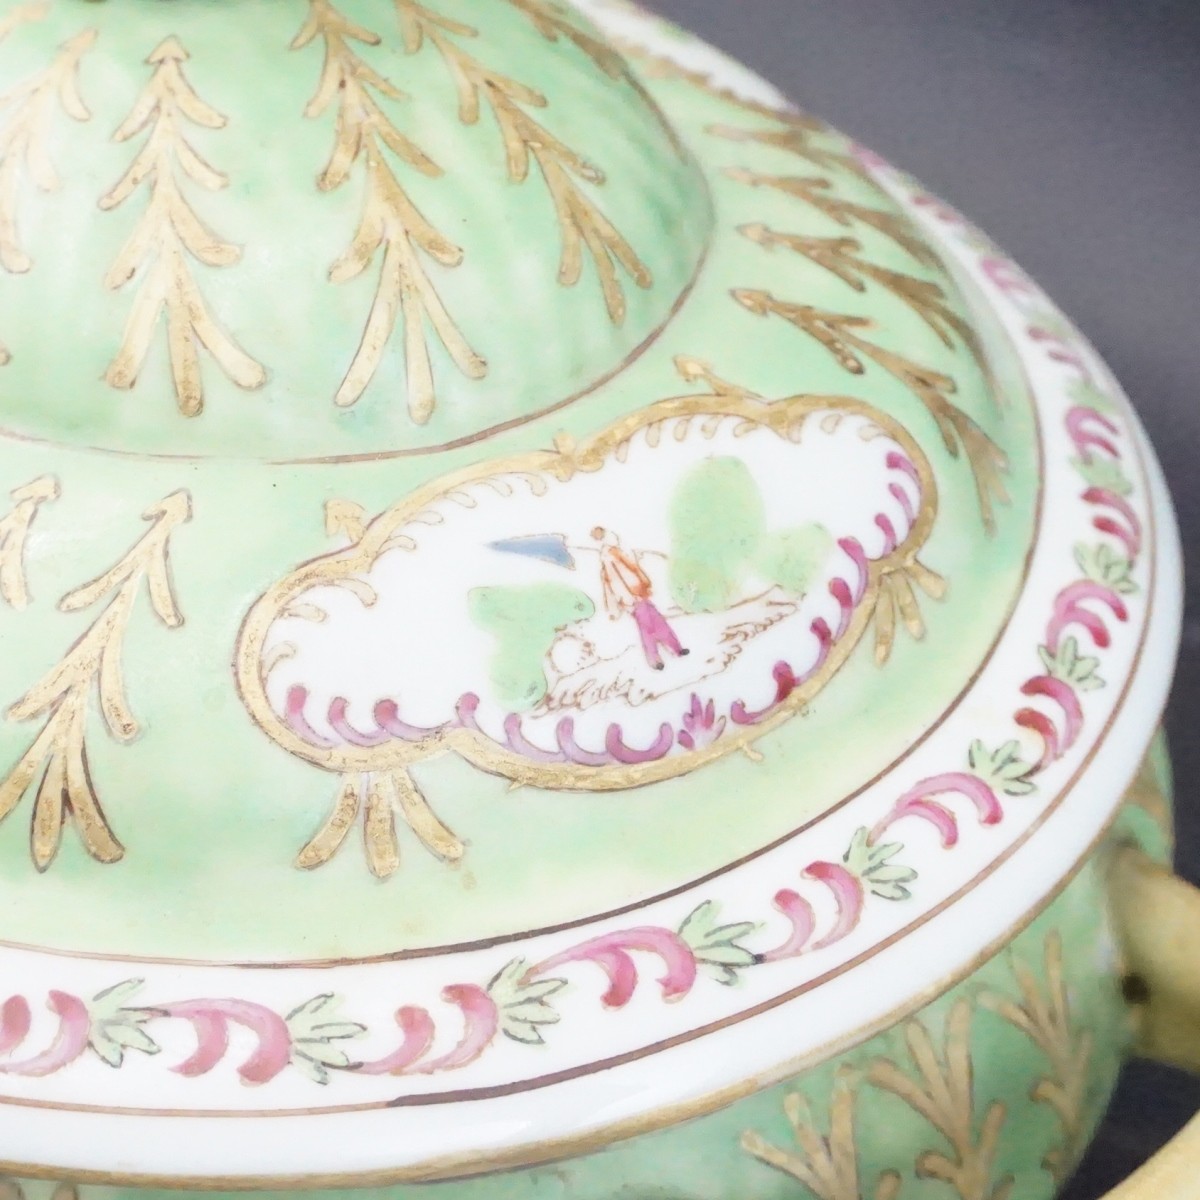 Chinese Covered Porcelain Tureen